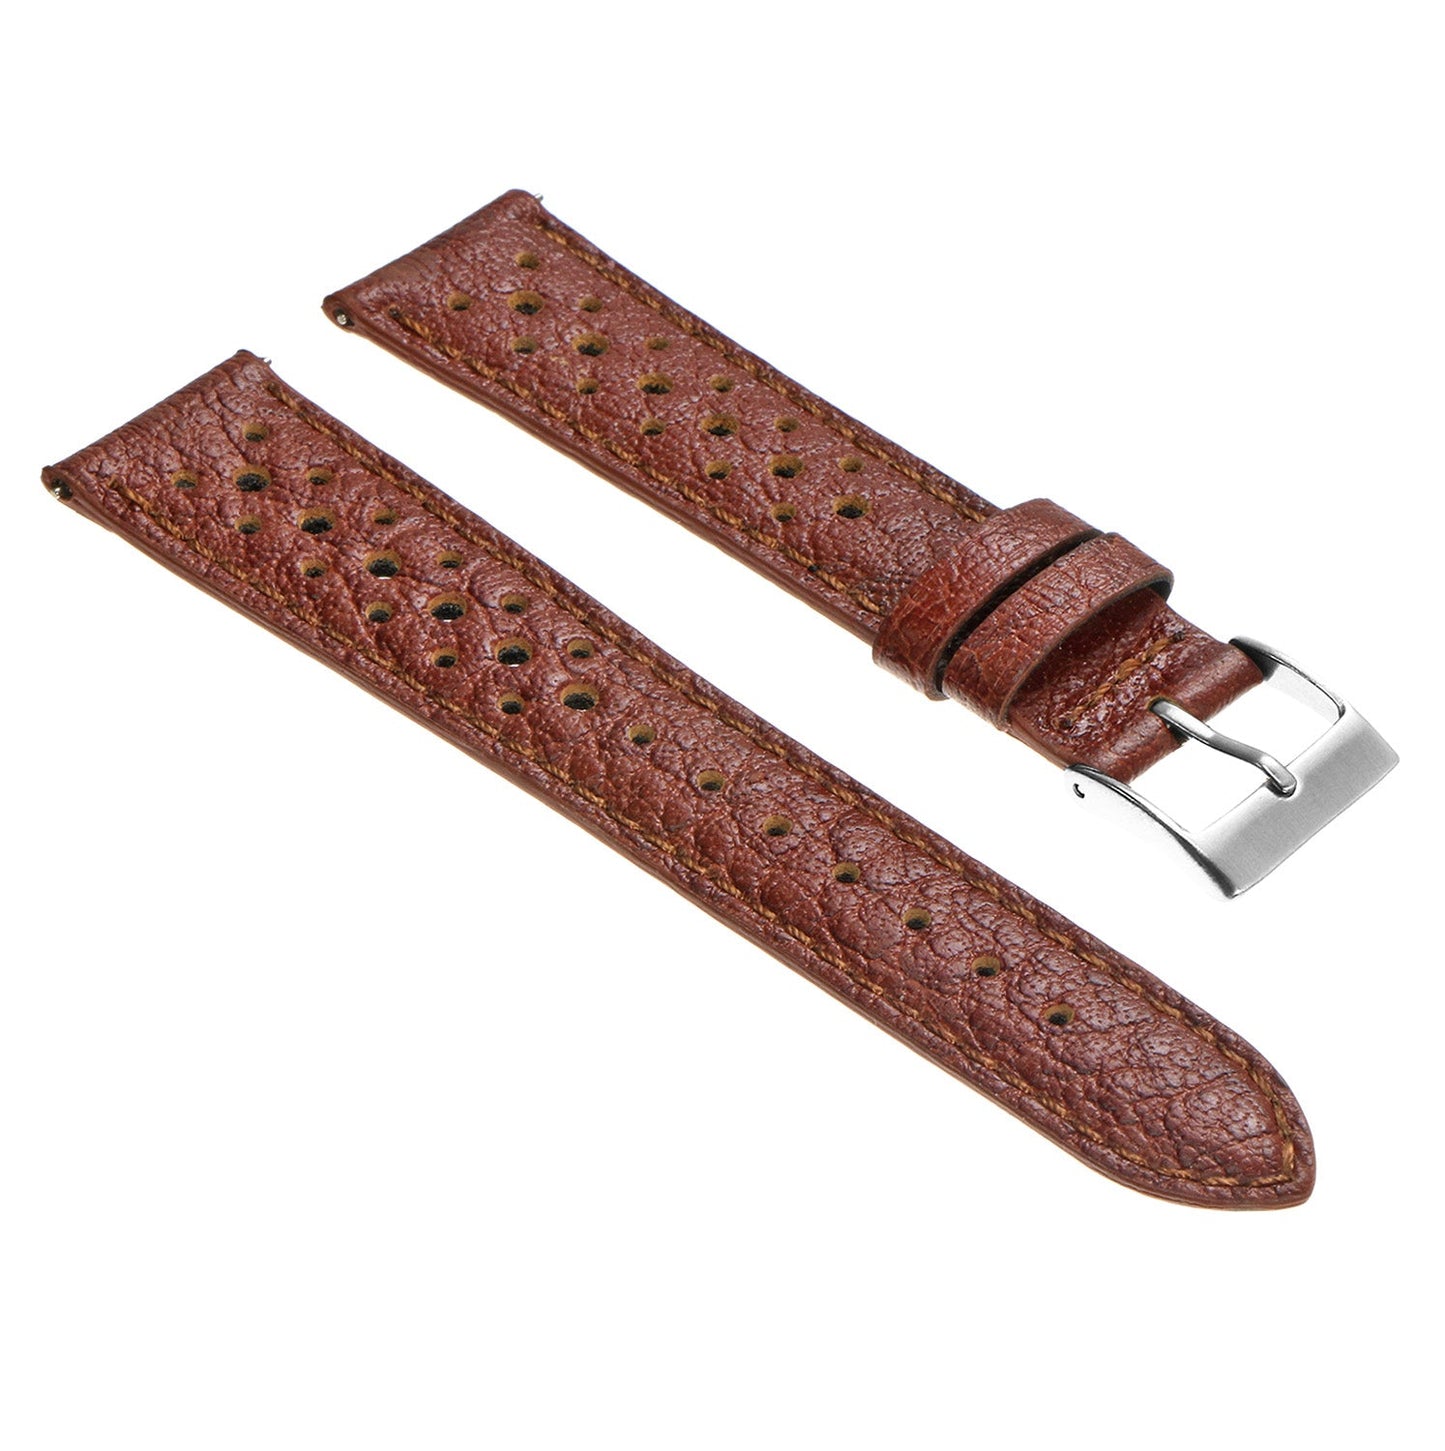 Dassari Perforated Leather Rally Strap - Extra Short